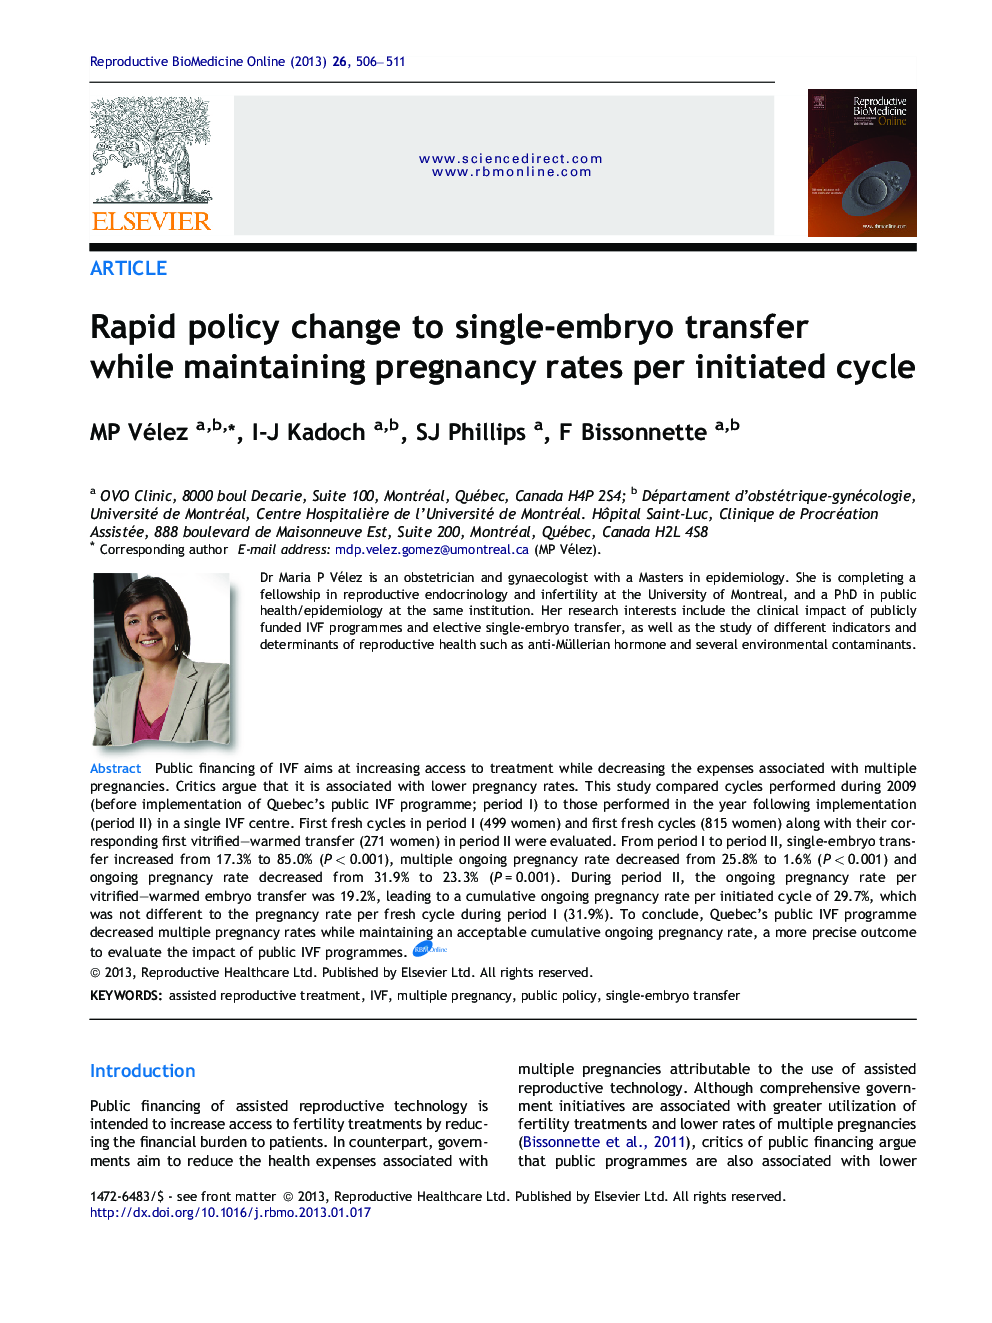 Rapid policy change to single-embryo transfer while maintaining pregnancy rates per initiated cycle